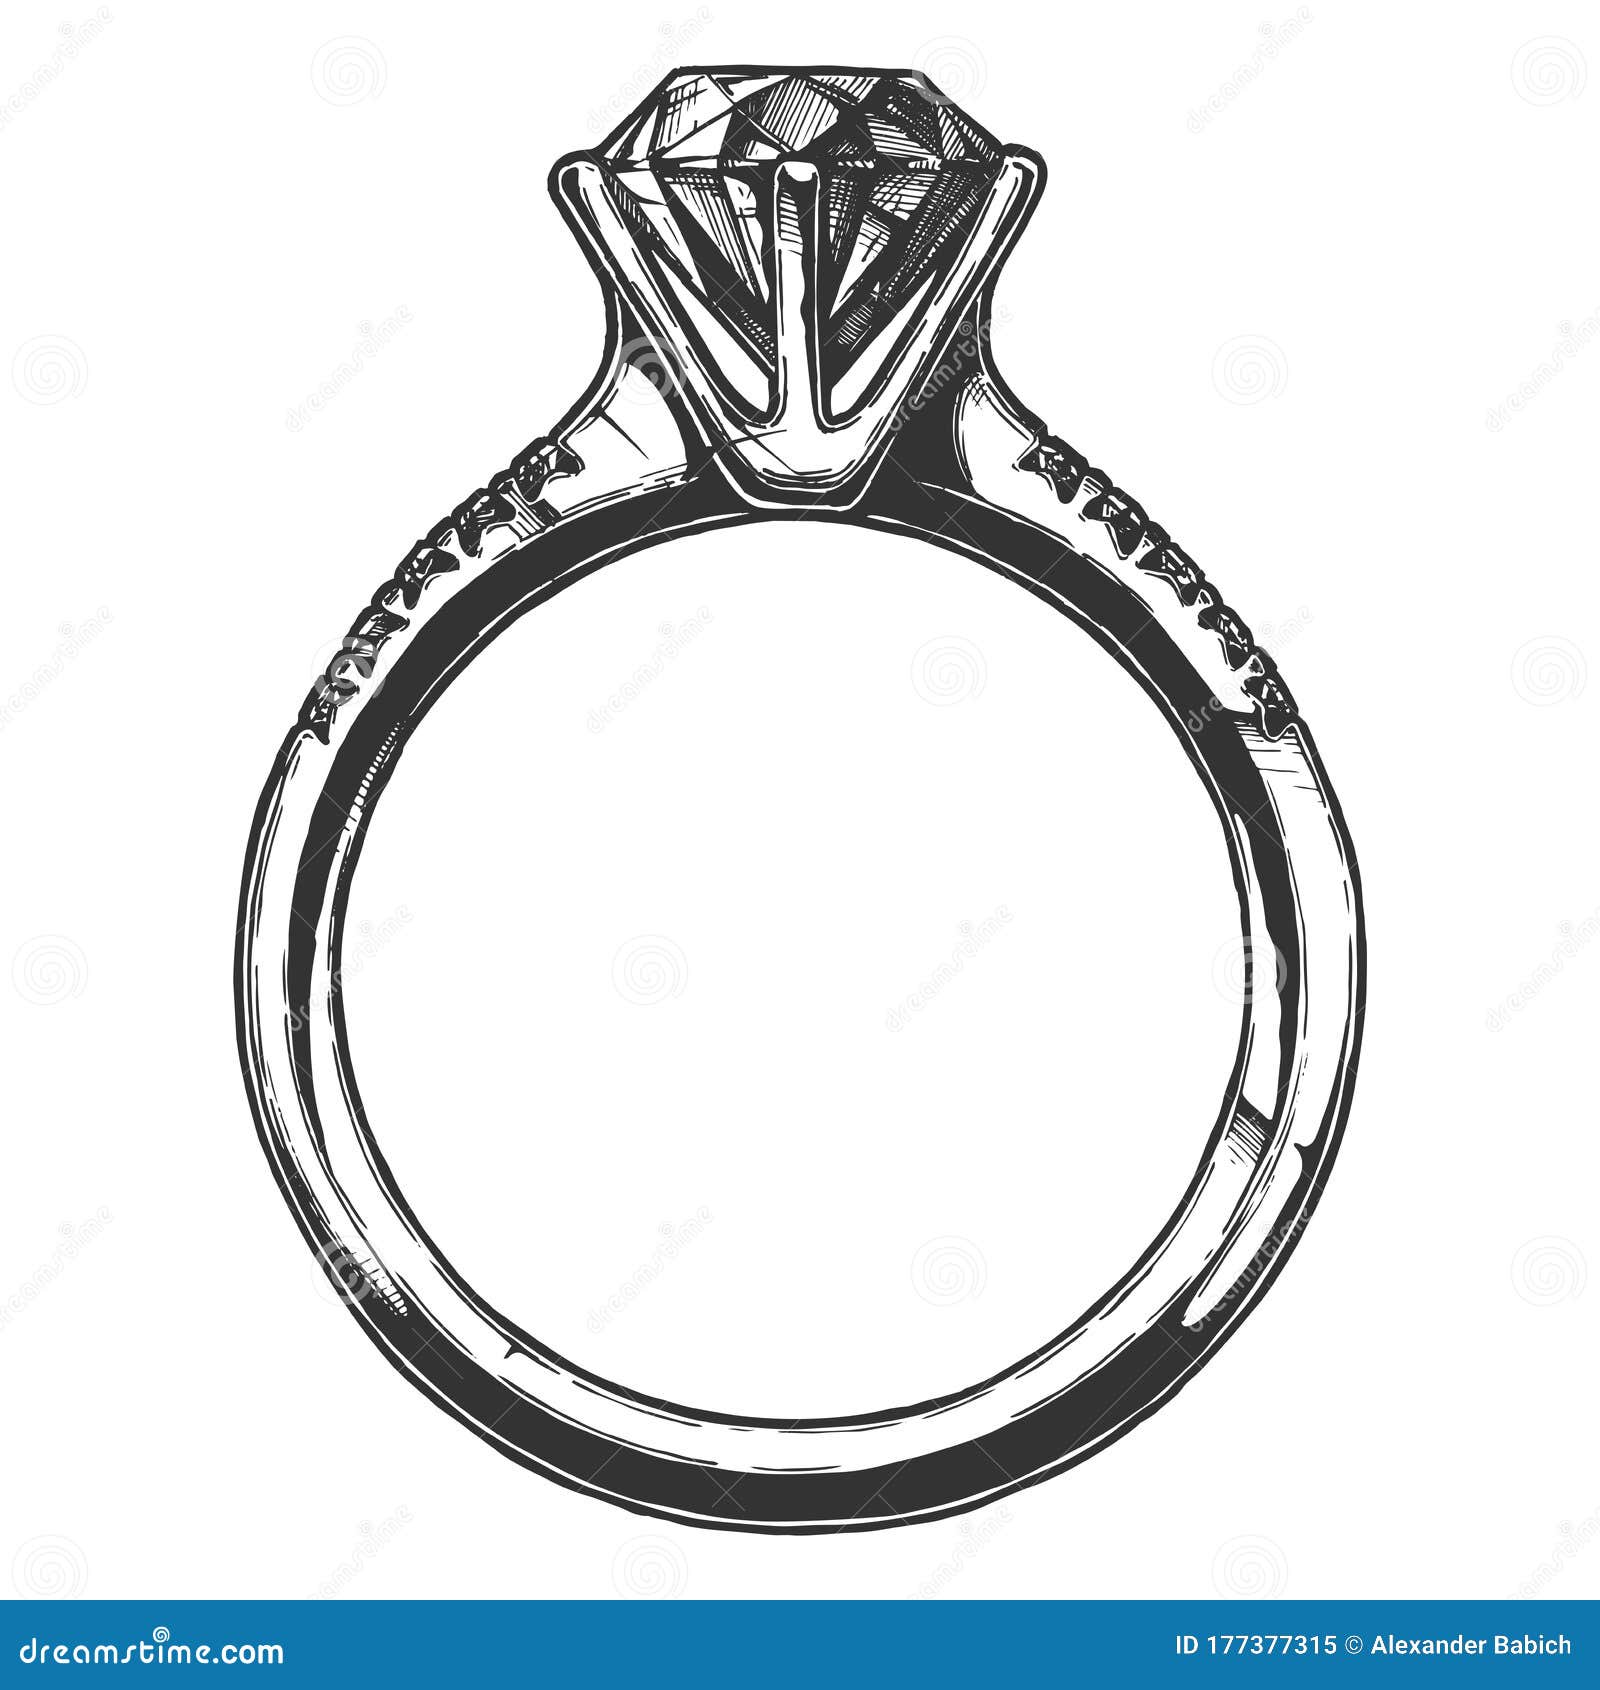 Pencil Drawing of a Diamond Ring : r/drawing